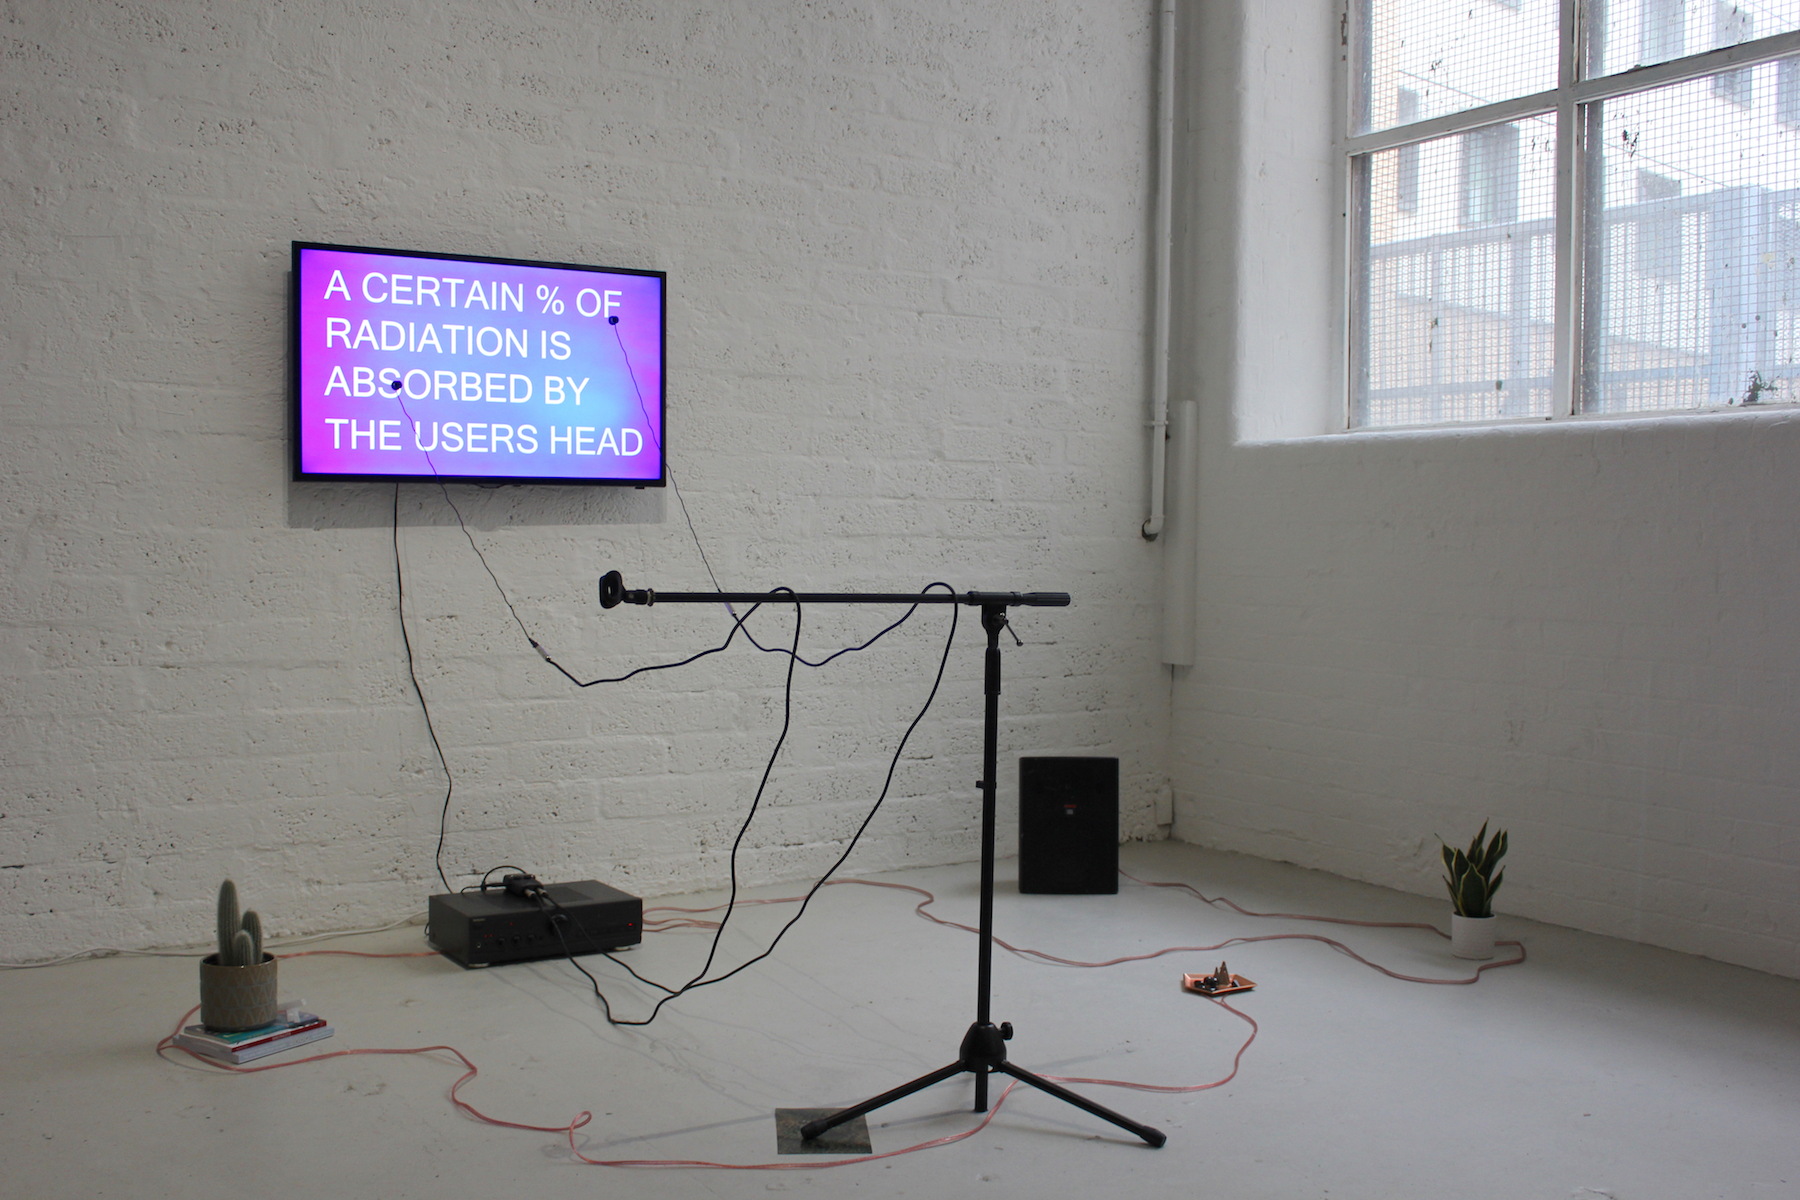 a microphone stand with cables and a tv screen on the wall with white text on pink, reading " A CERTAIN % OF RADIATION IS ABSORBED BY THE USERS HEAD"